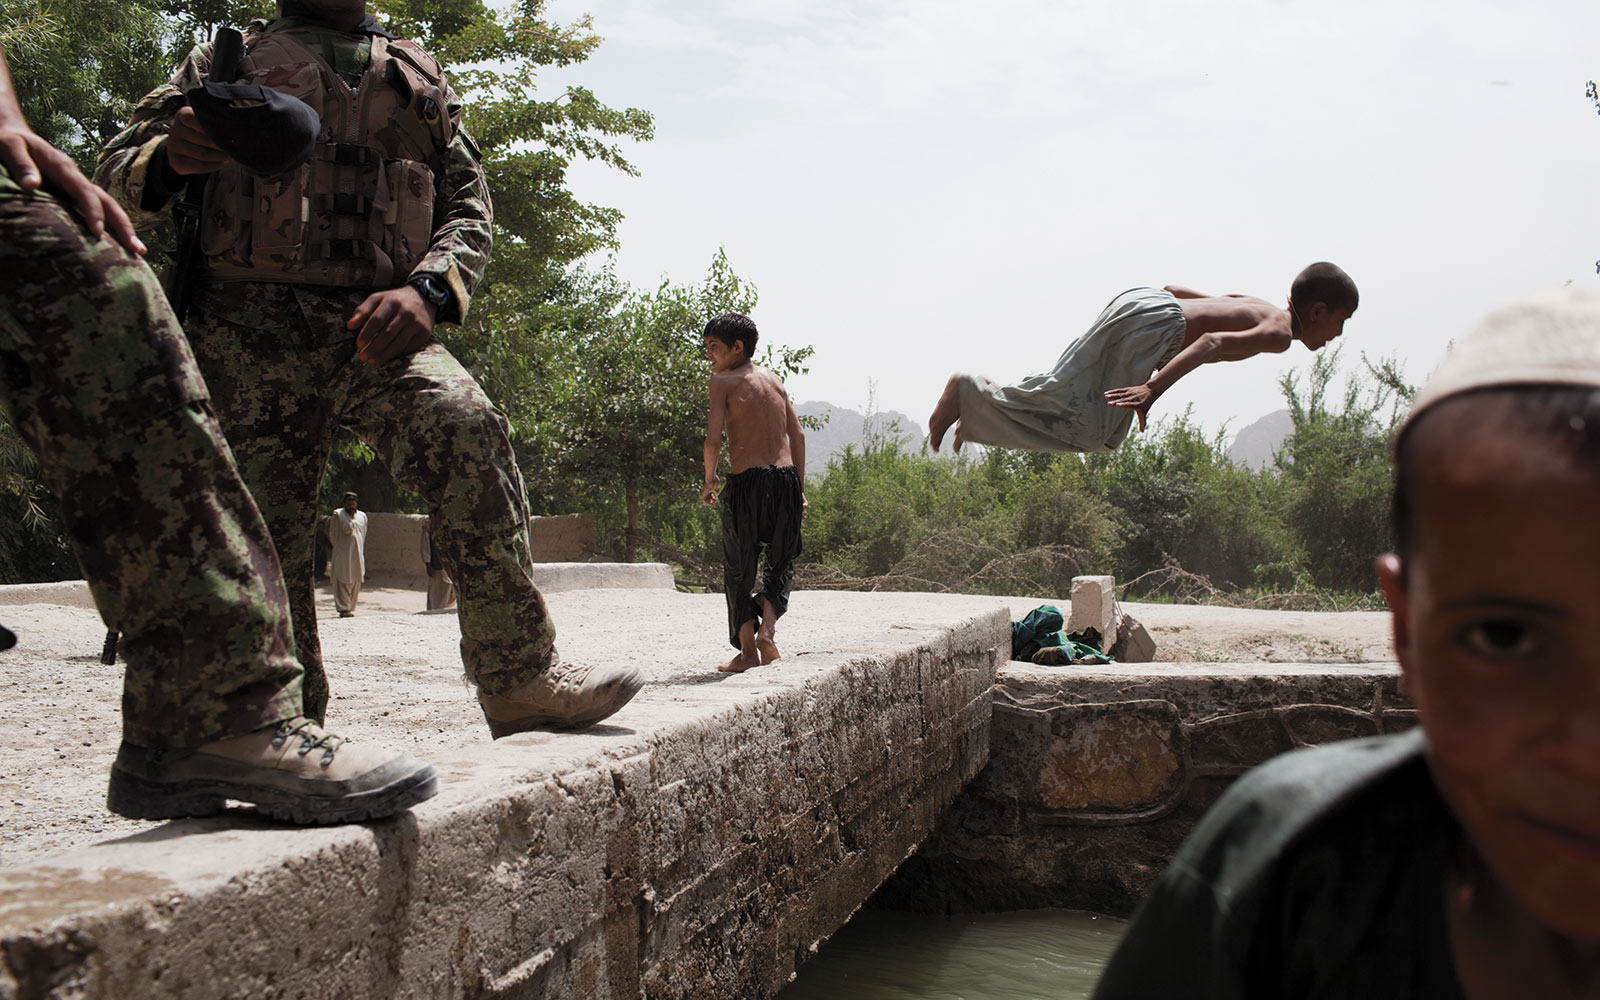 Children play in a canal outside the Tabin market, which at one point saw heavy fighting between Afghan, U.S., and NATO forces and the Taliban. Today it is safe to walk through the area.